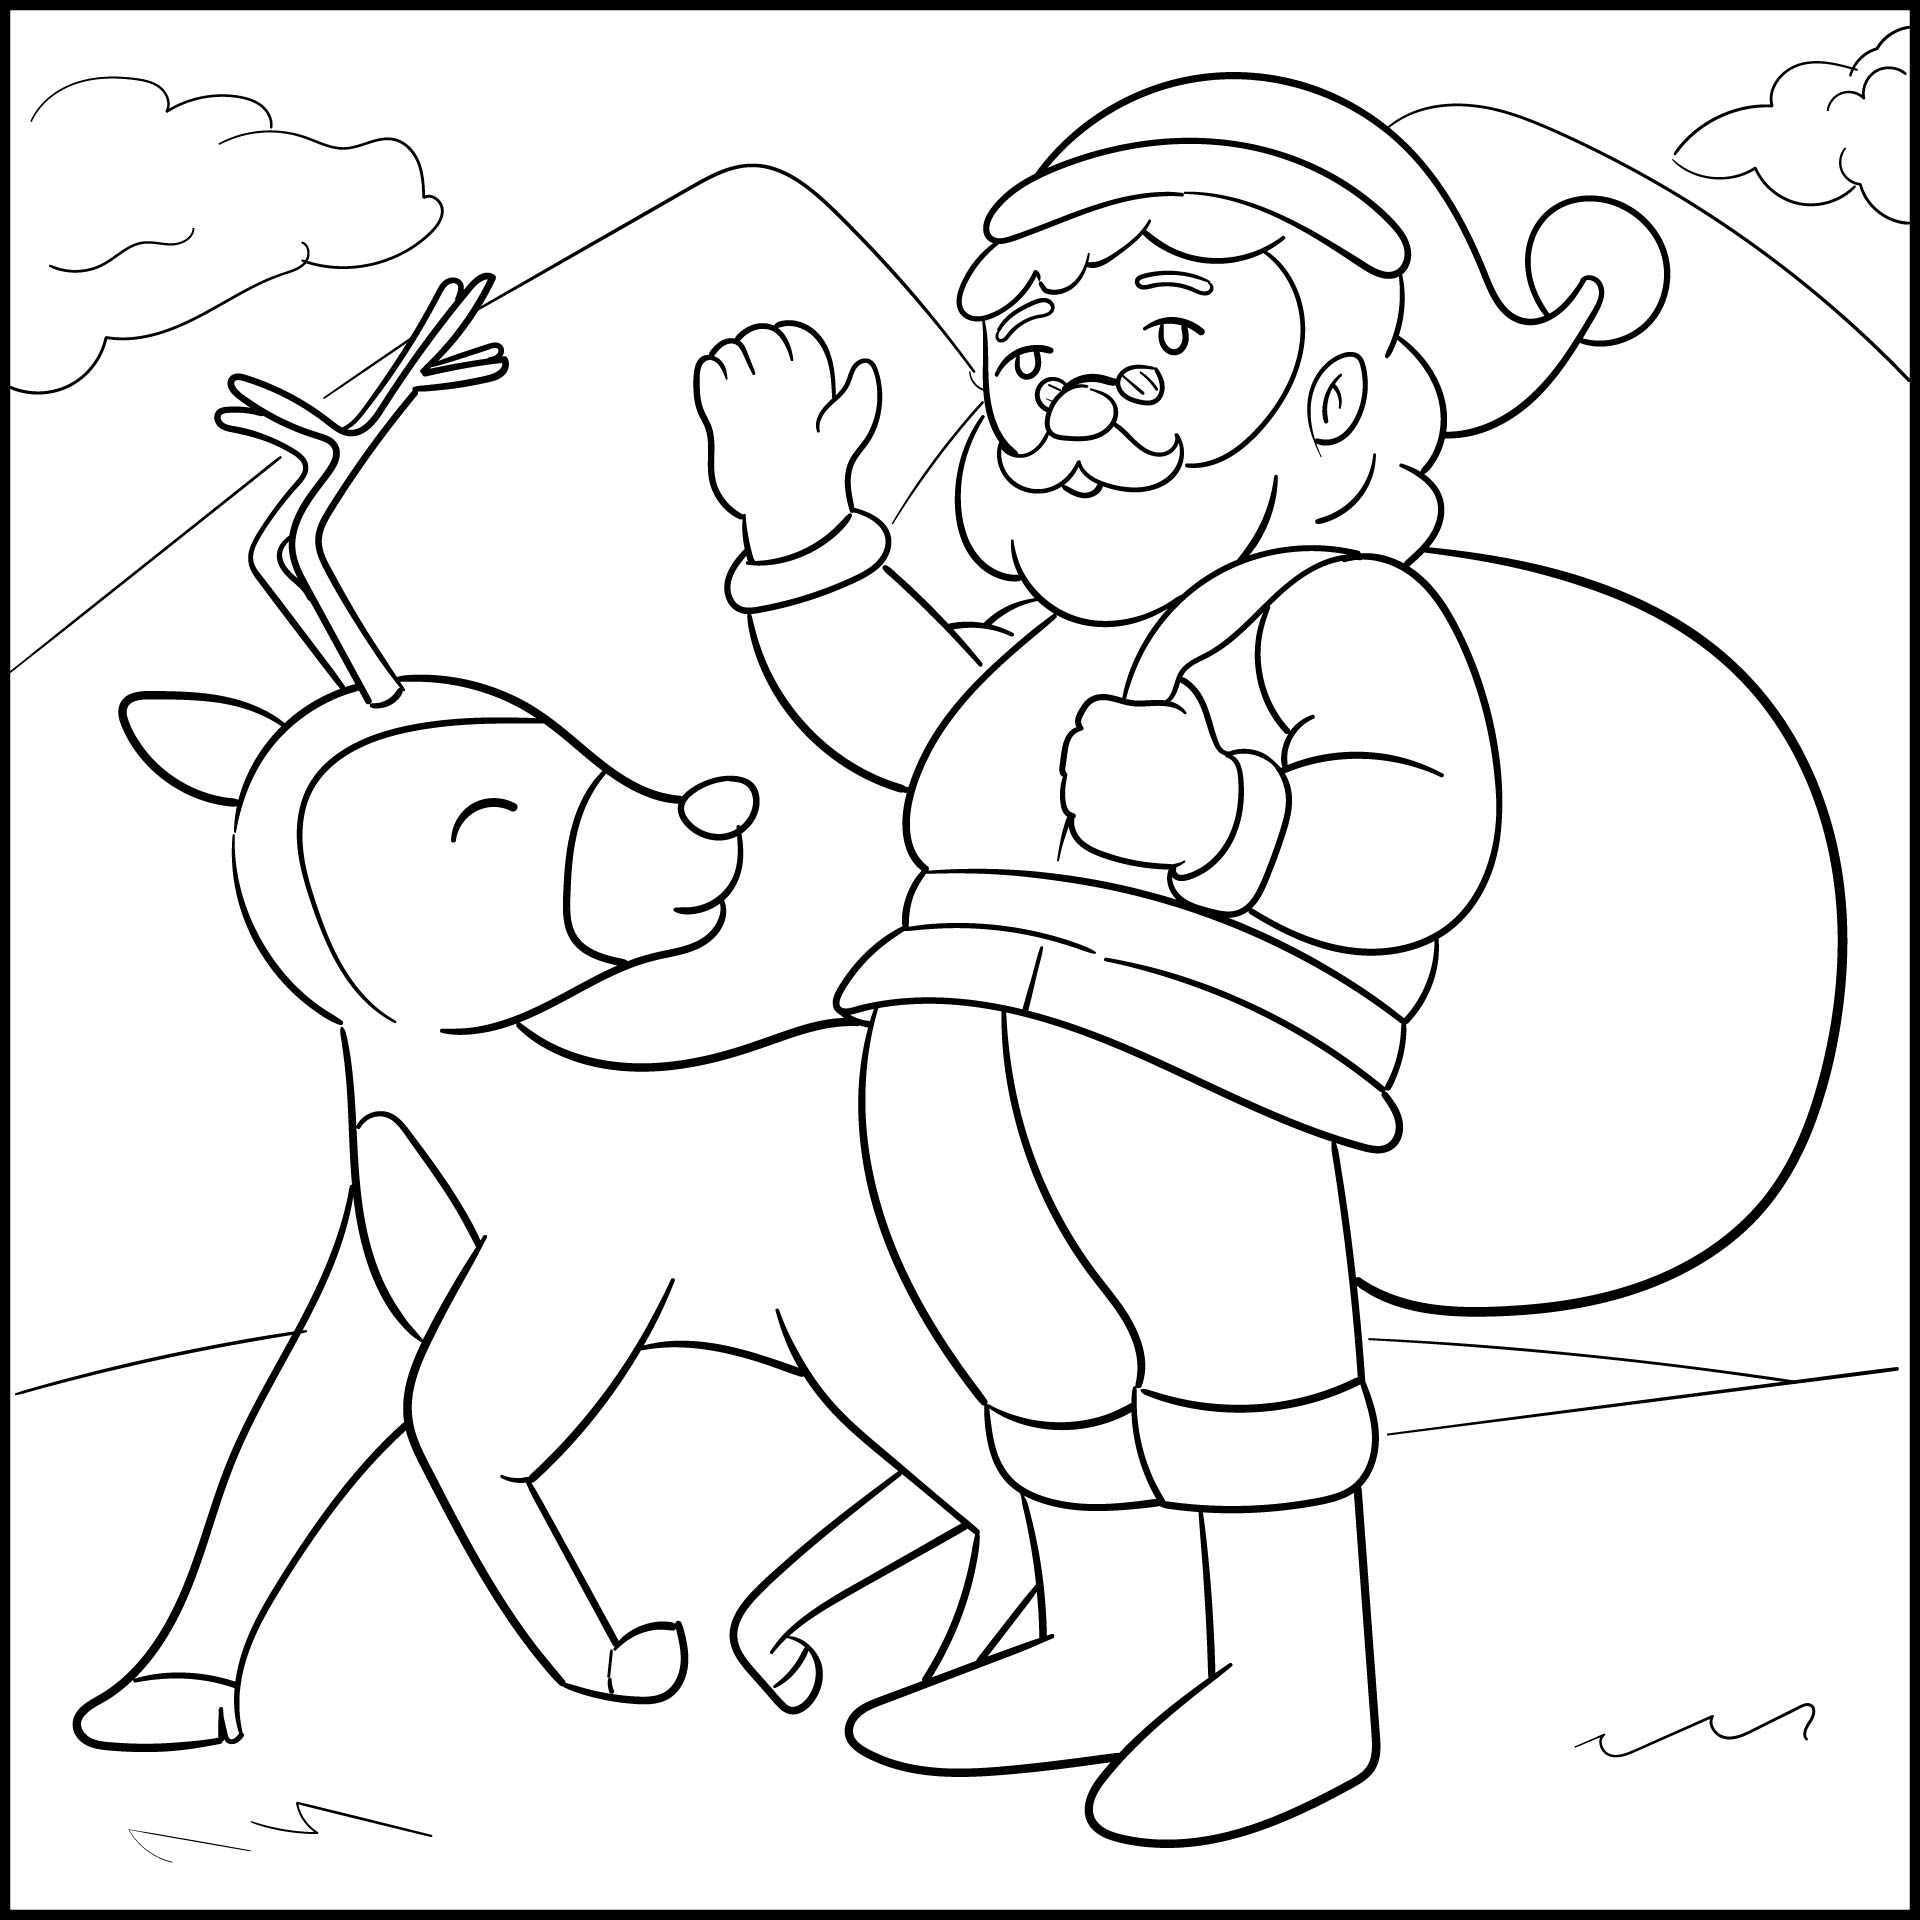 Santa and Rudolph Coloring Pages Printable